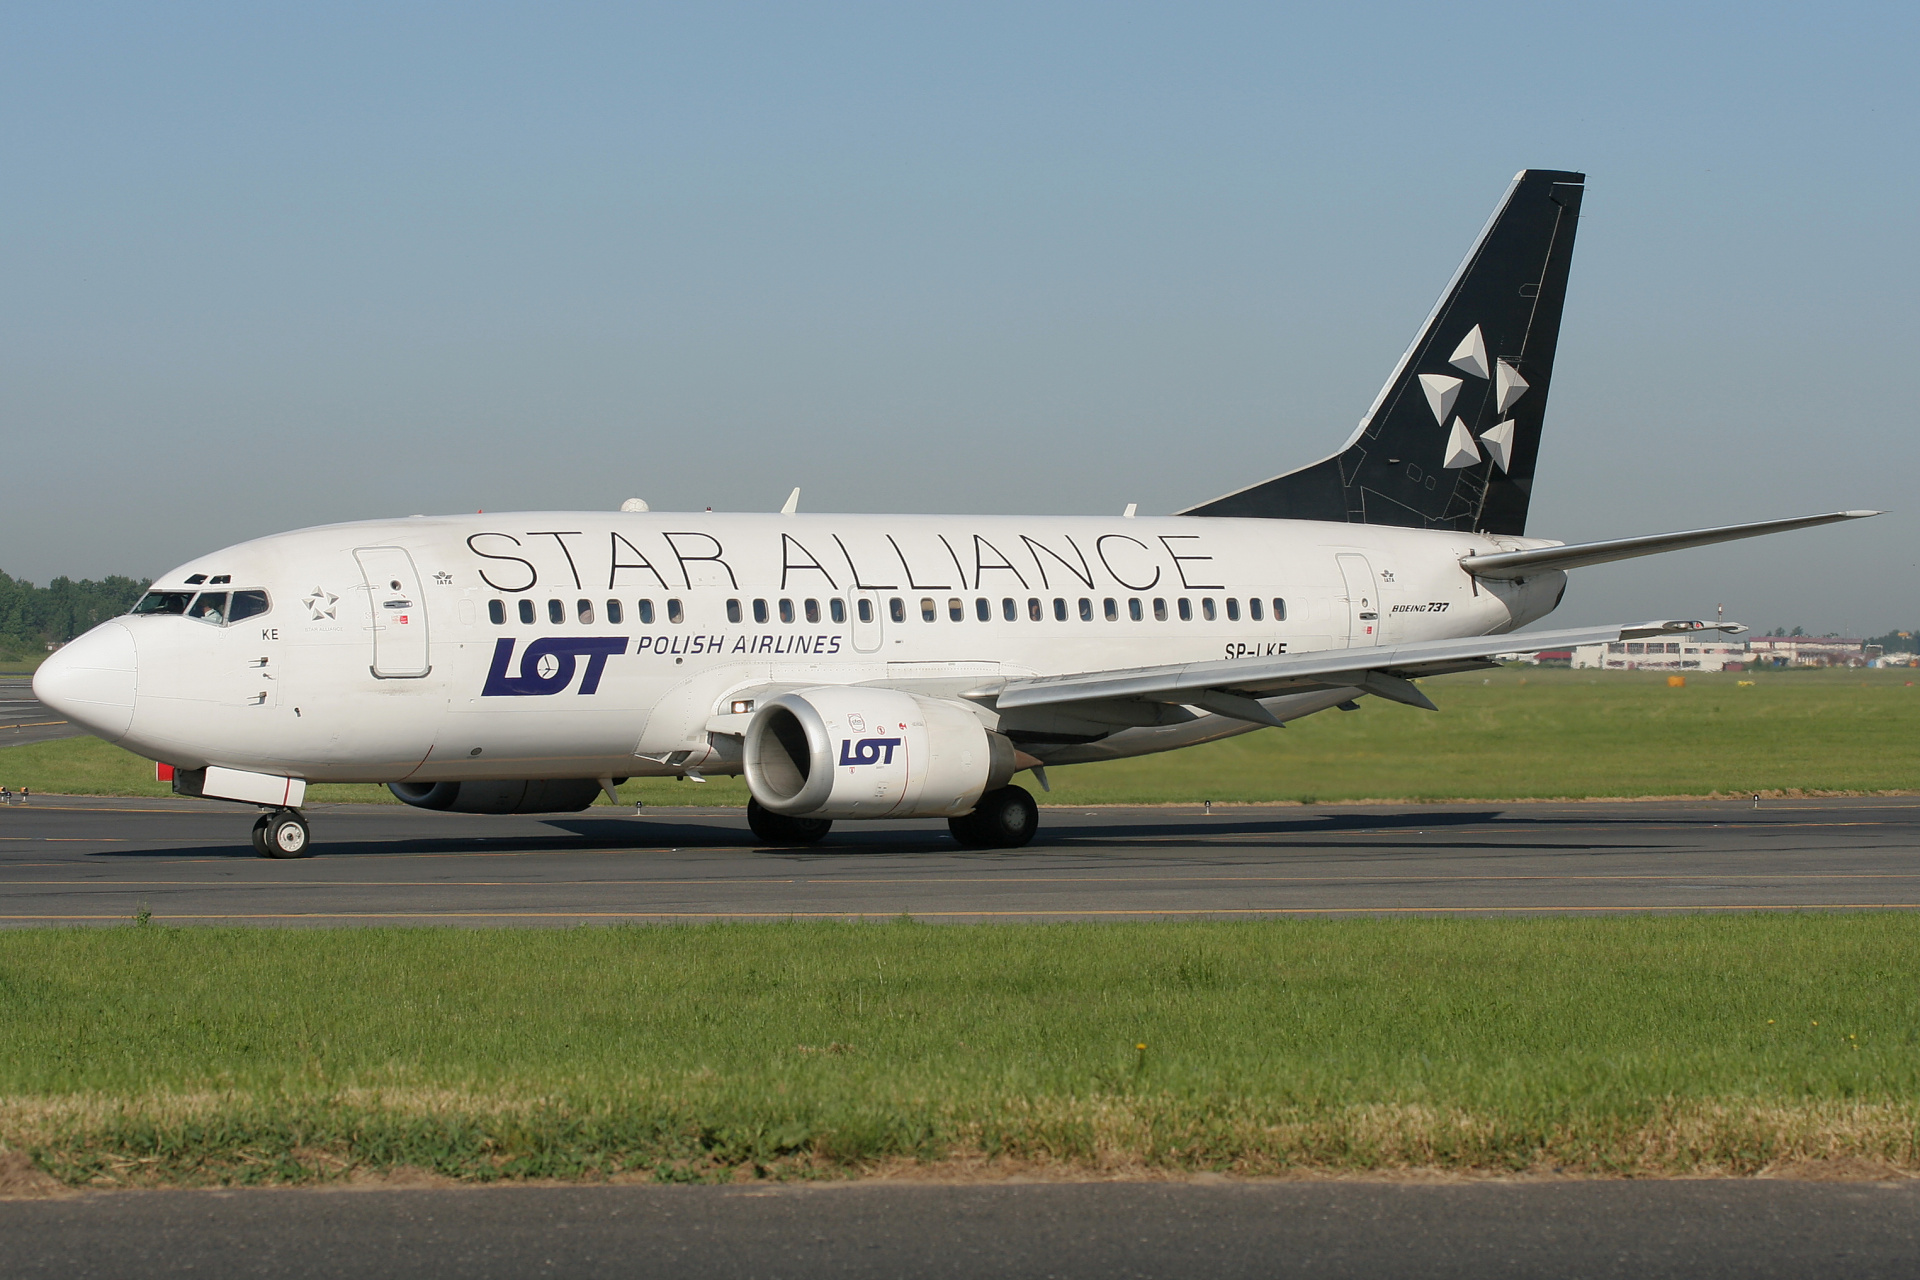 SP-LKE (Star Alliance livery) (Aircraft » EPWA Spotting » Boeing 737-500 » LOT Polish Airlines)